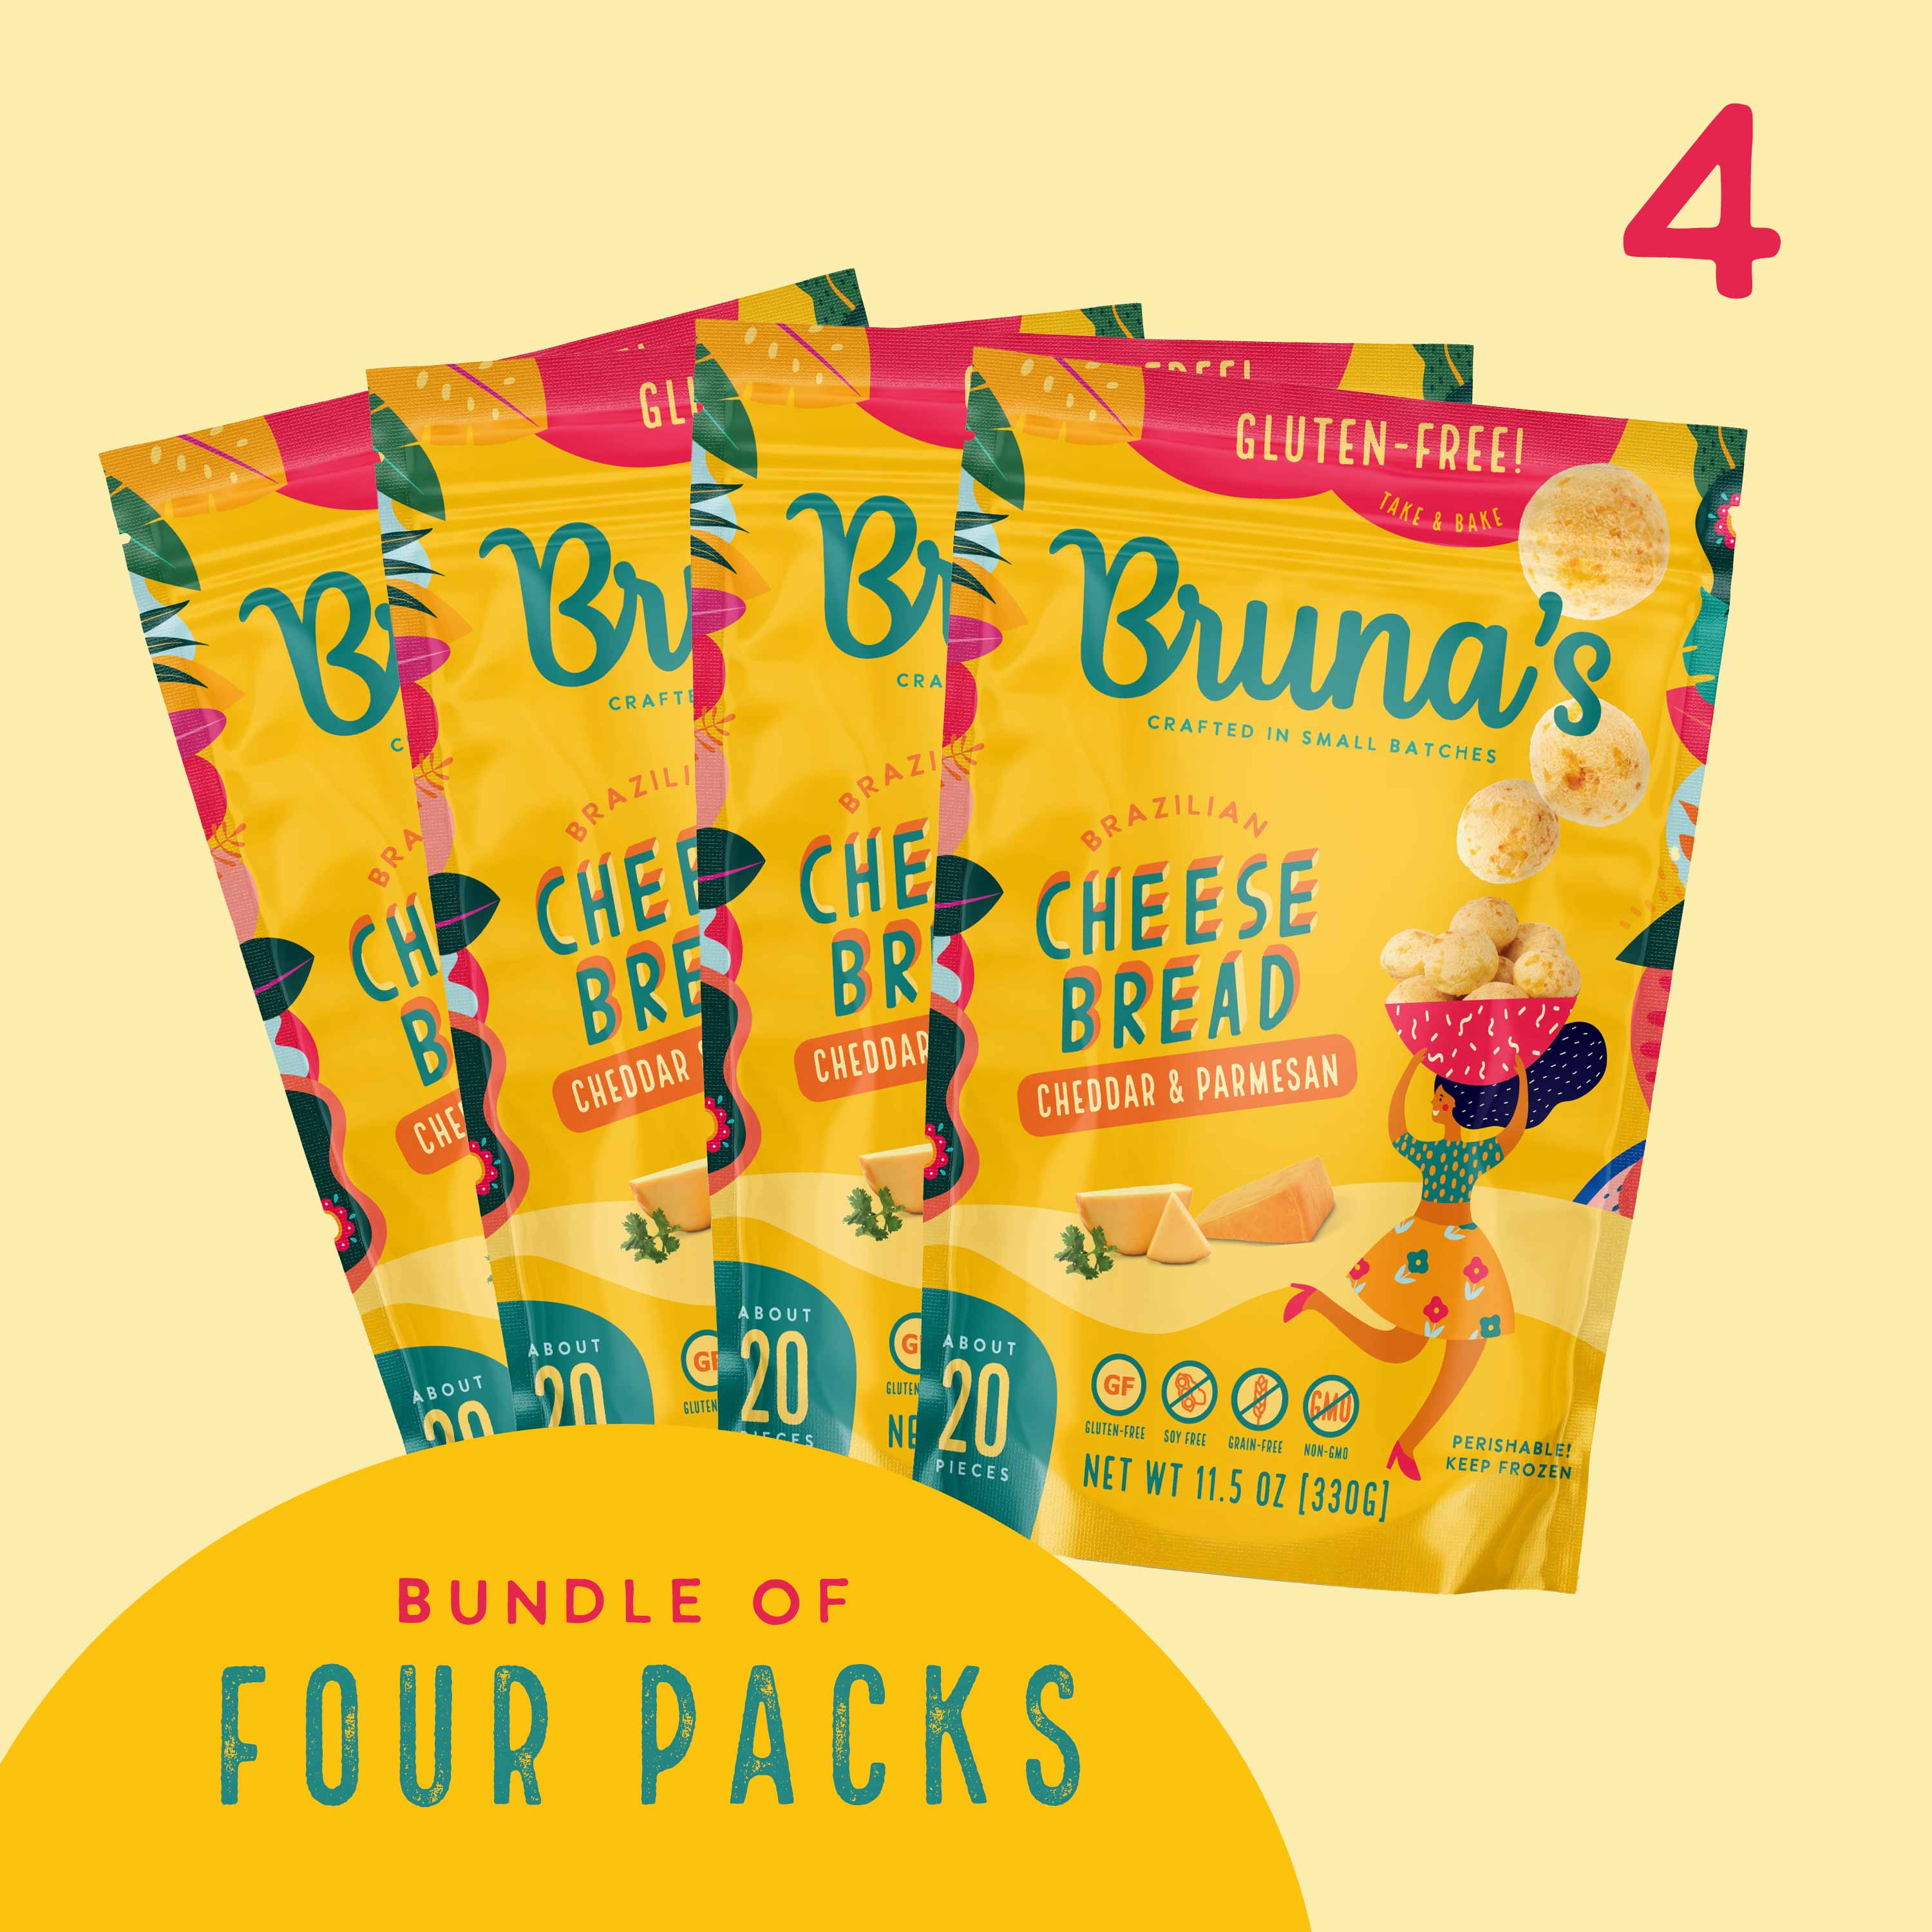 4 Pack of Bruna's Cheese Bread